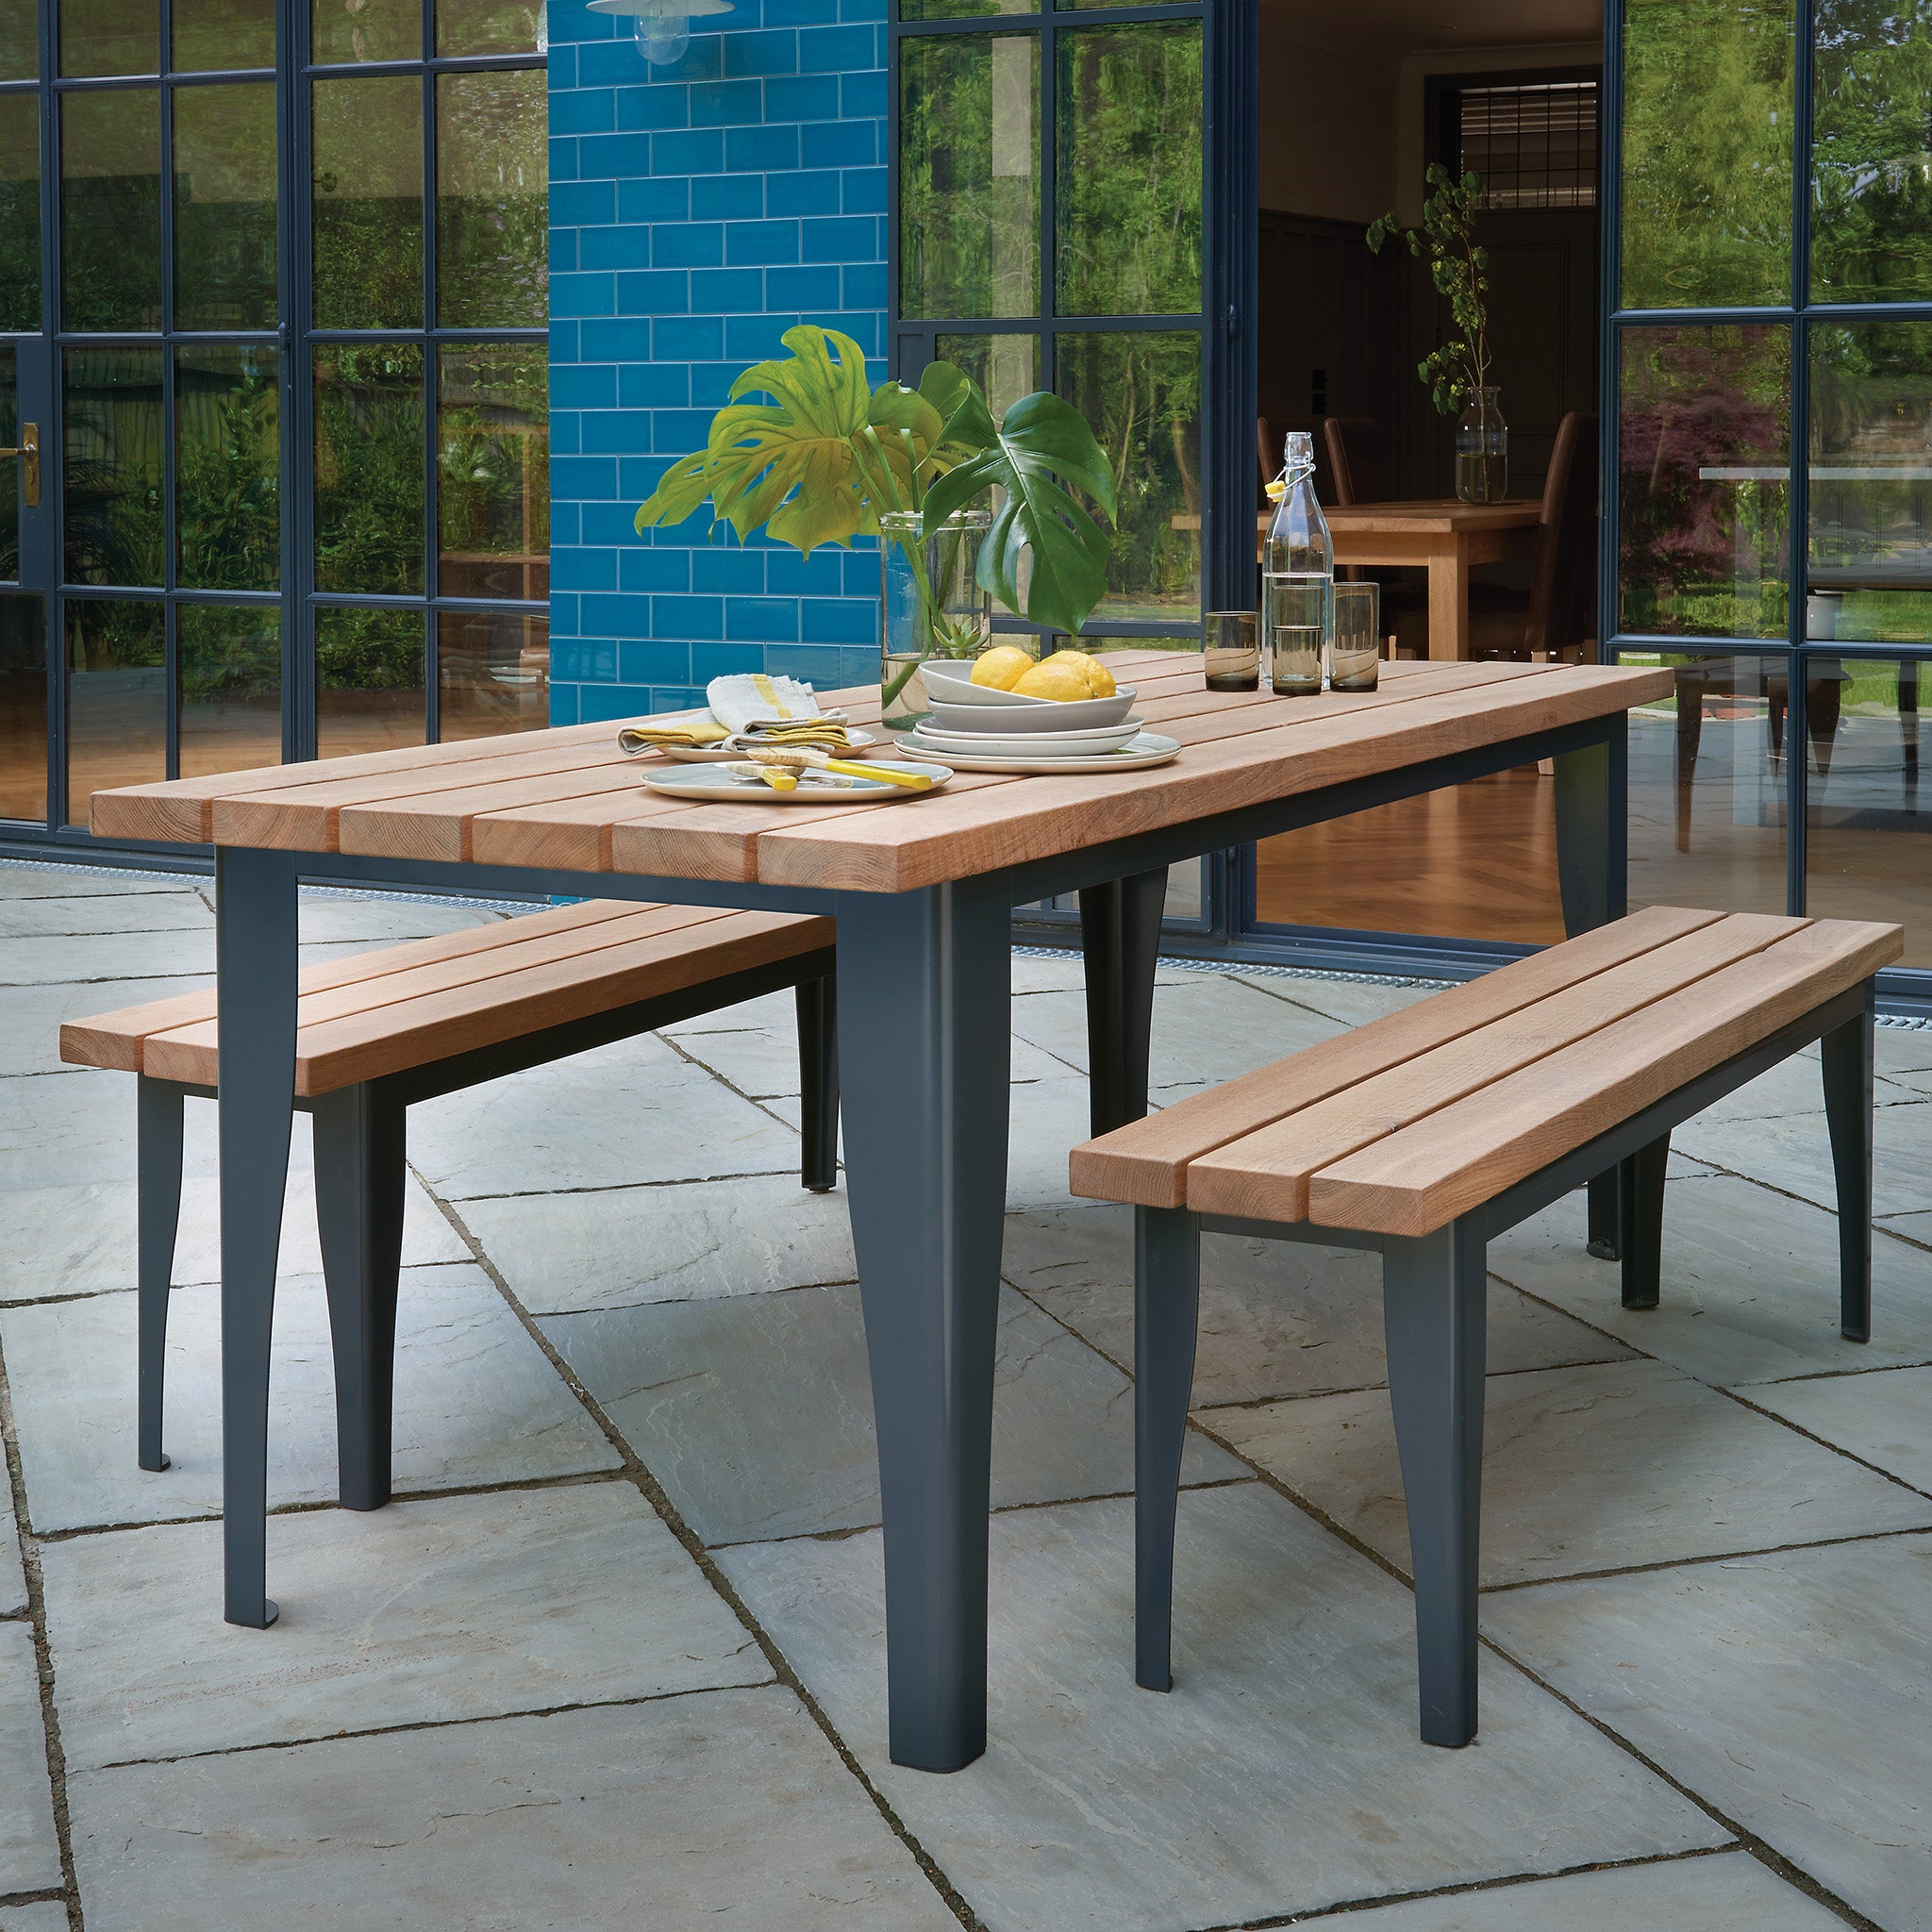 Oak and Metal outdoor table and benches